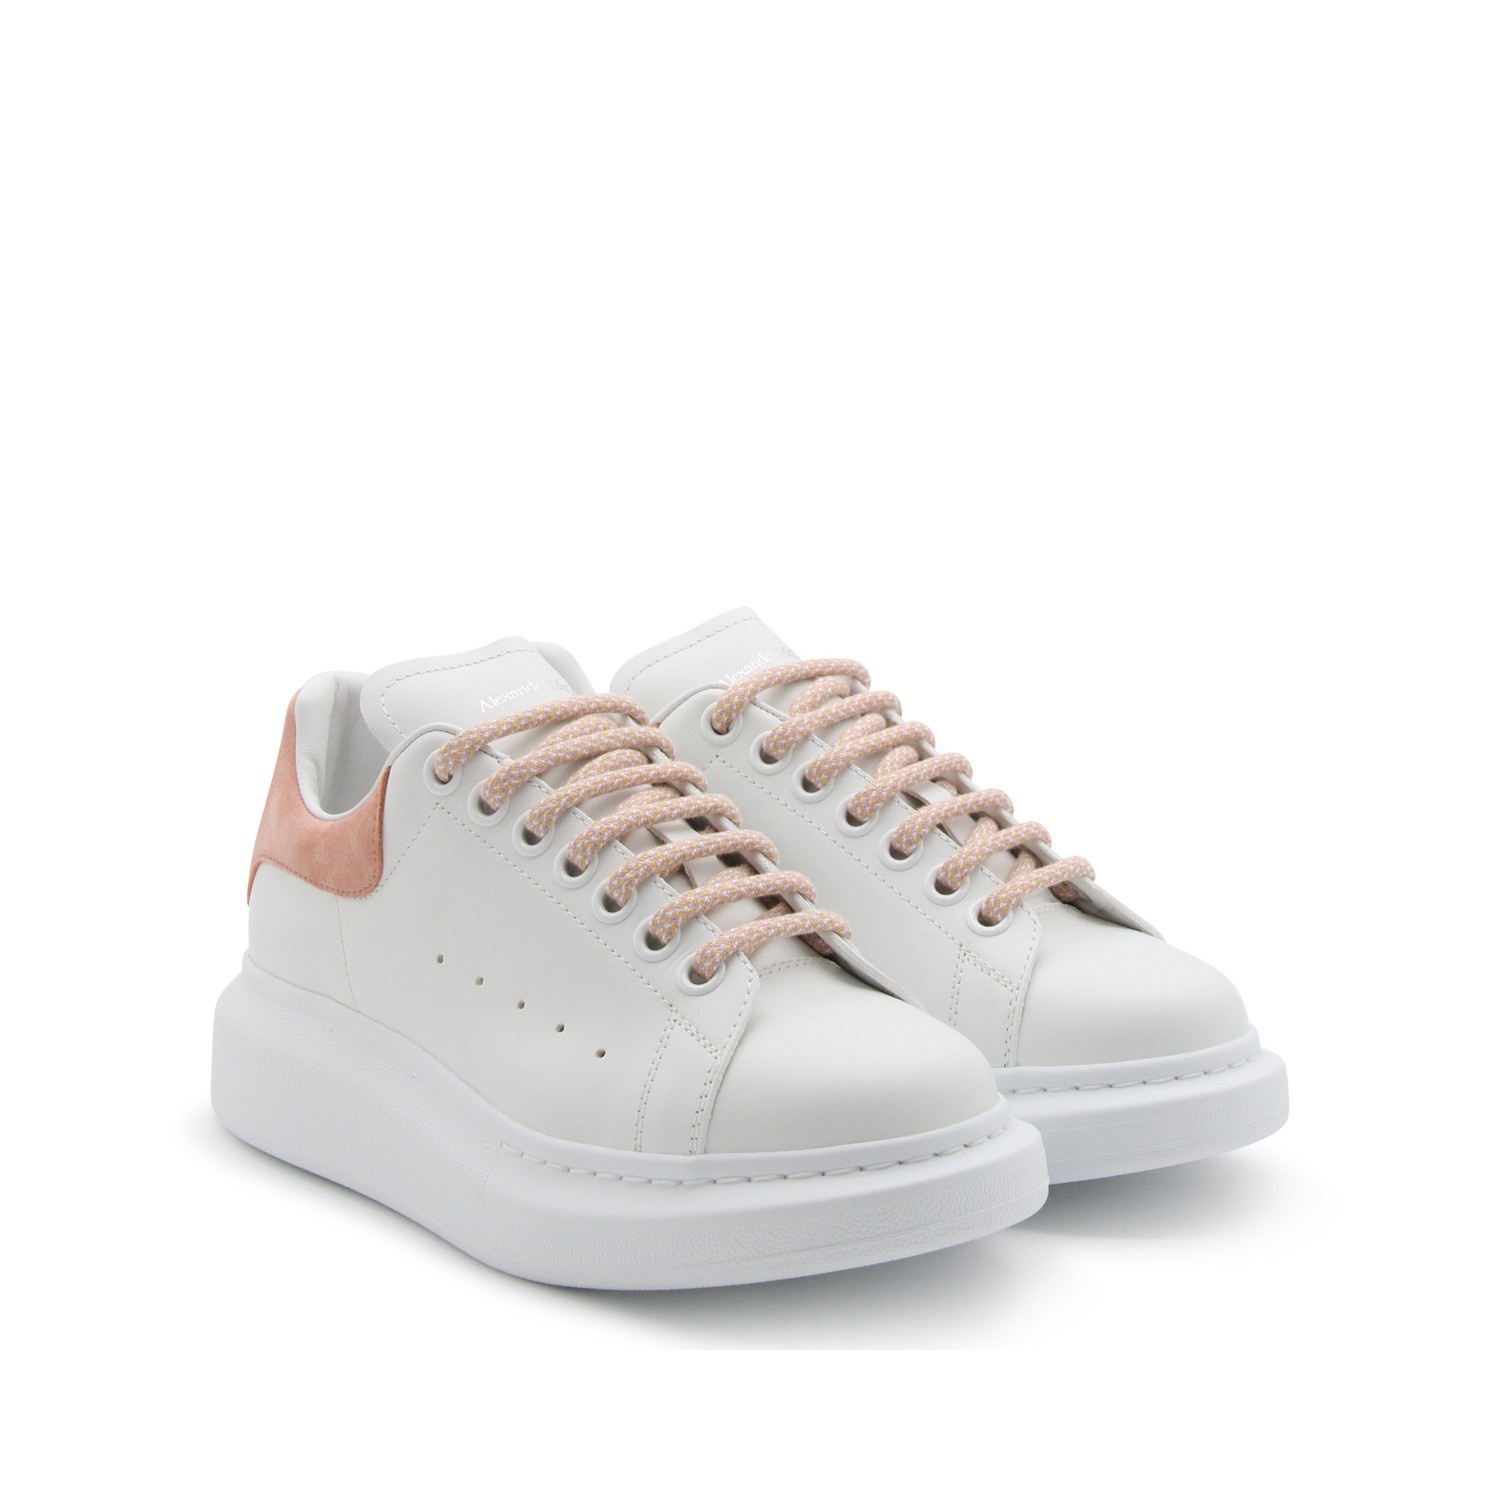 WHITE LEATHER AND PINK SUEDE OVERSIZED SNEAKERS - 2